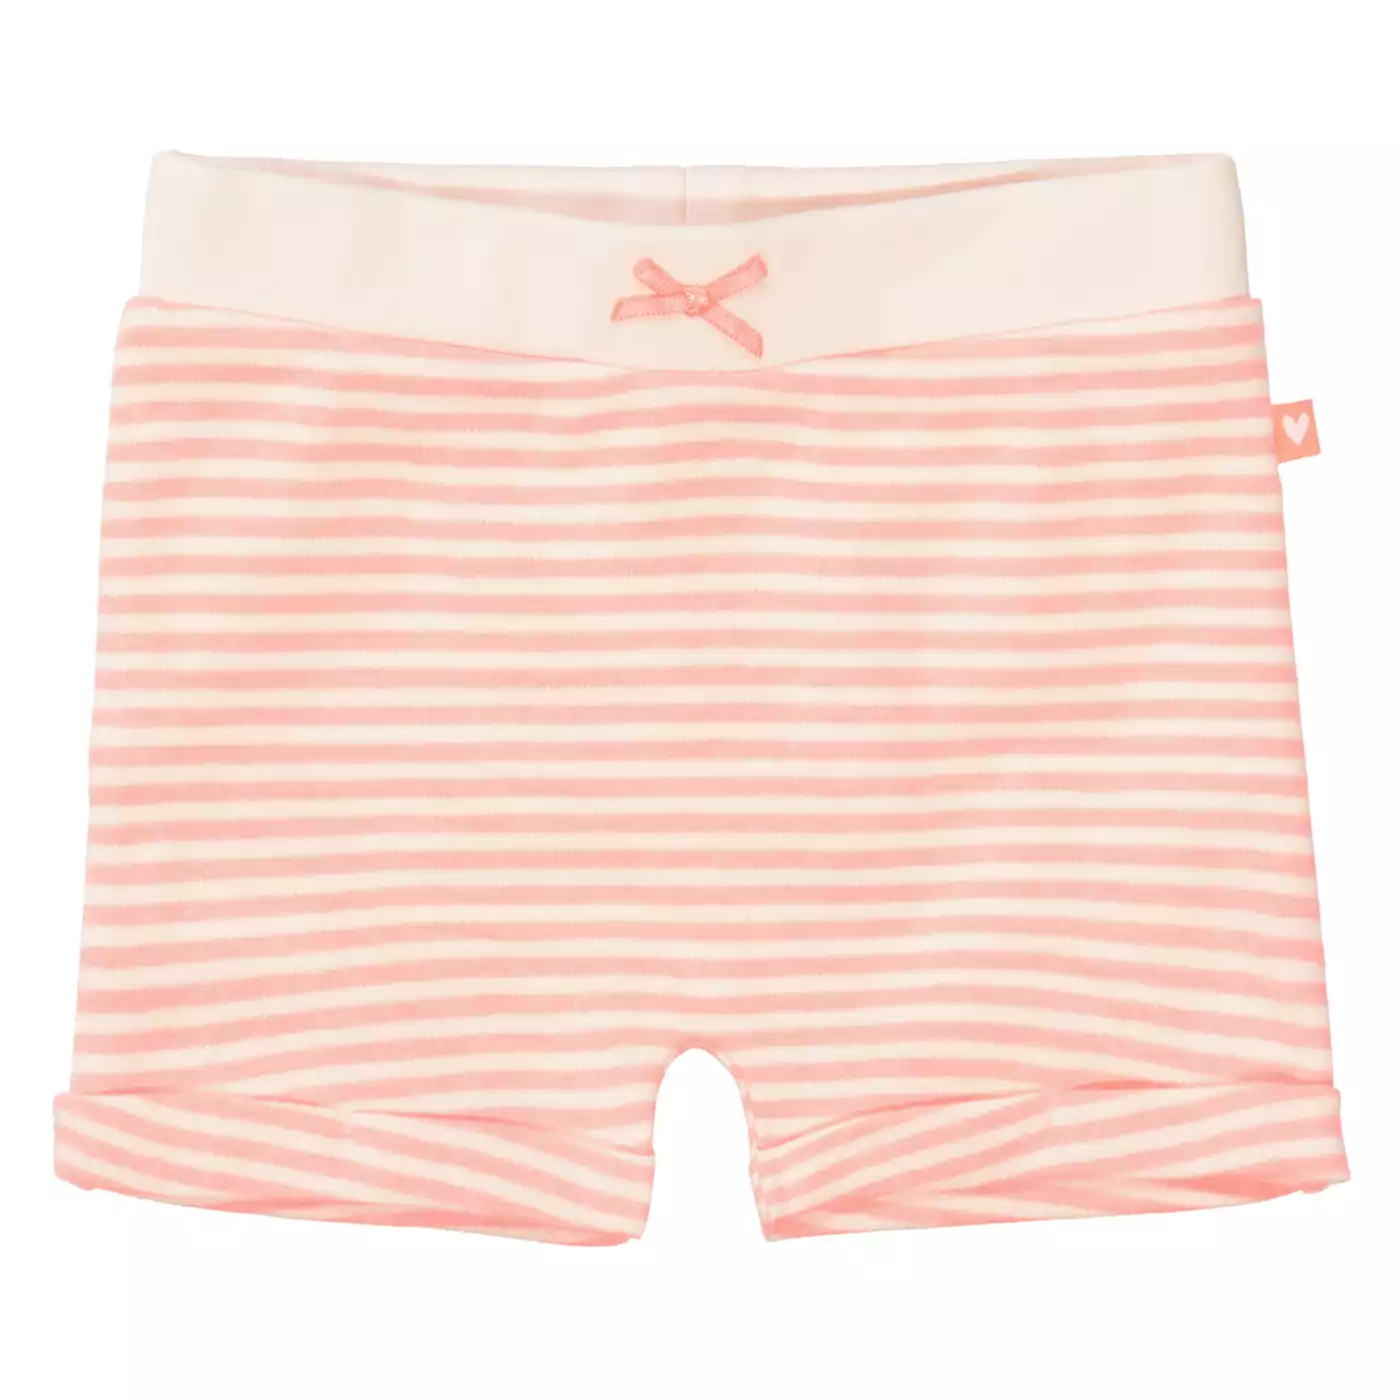 Shorts Neon Coral STACCATO Pink Rosa 2006580296107 3